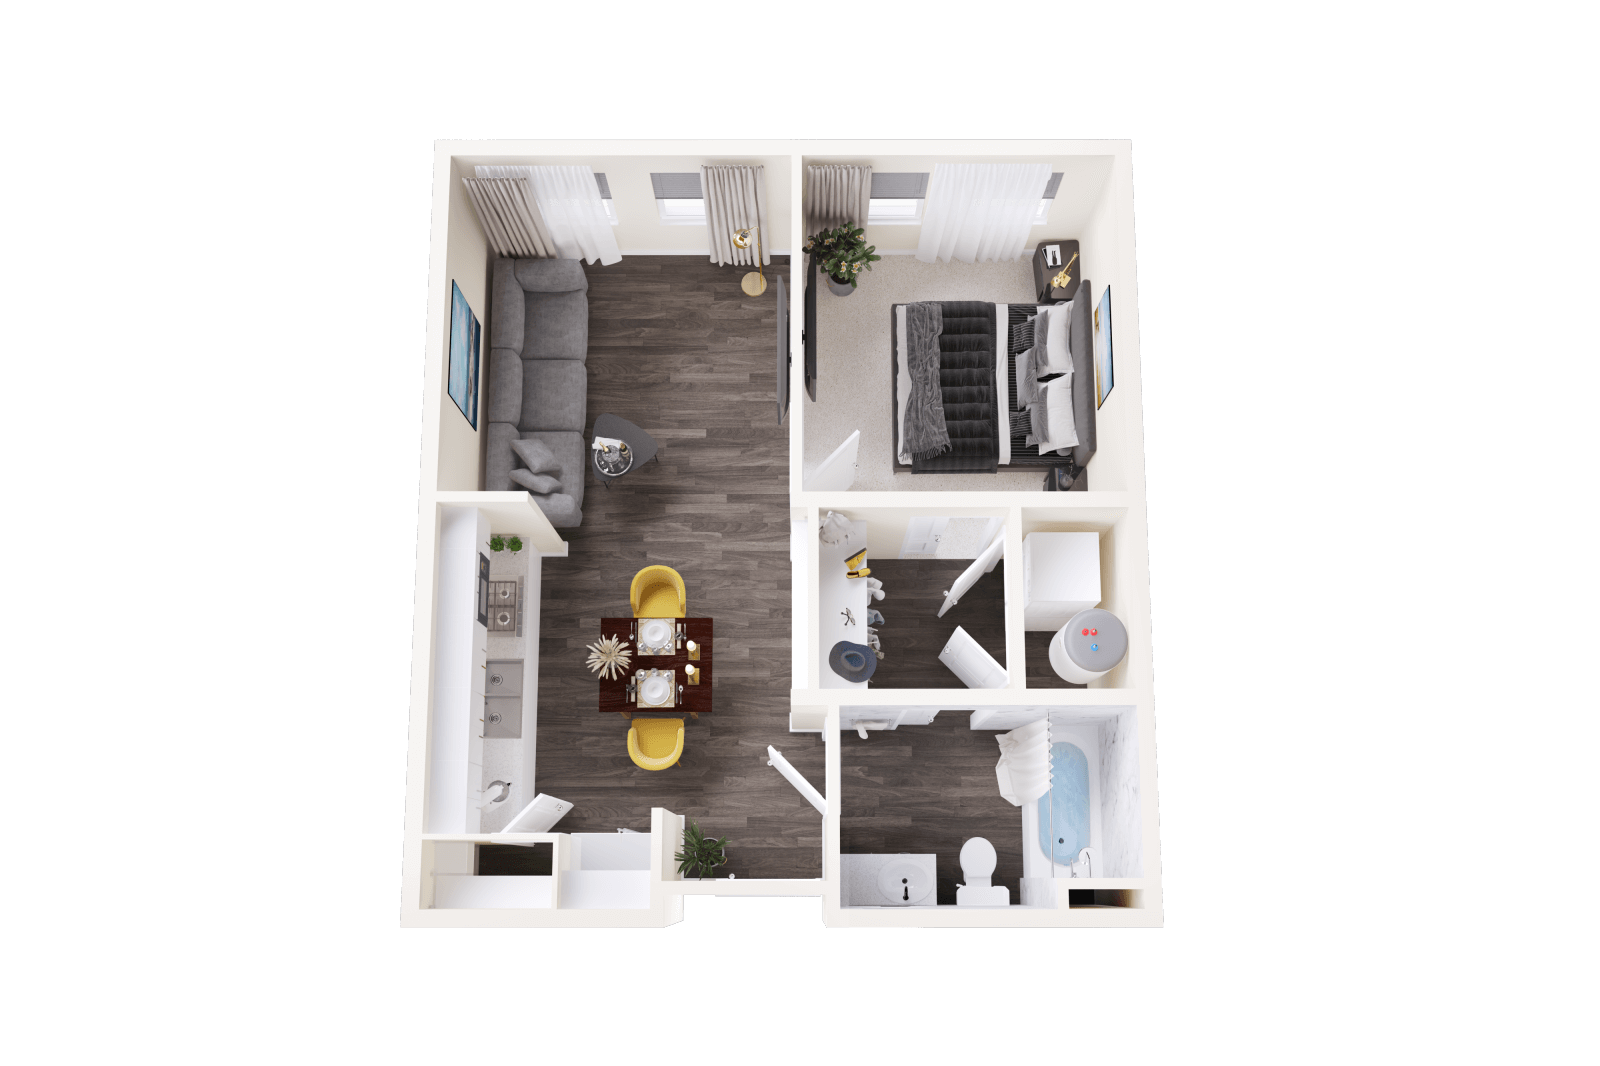 A Douglas unit with 1 Bedrooms and 1 Bathrooms with area of 547 sq. ft